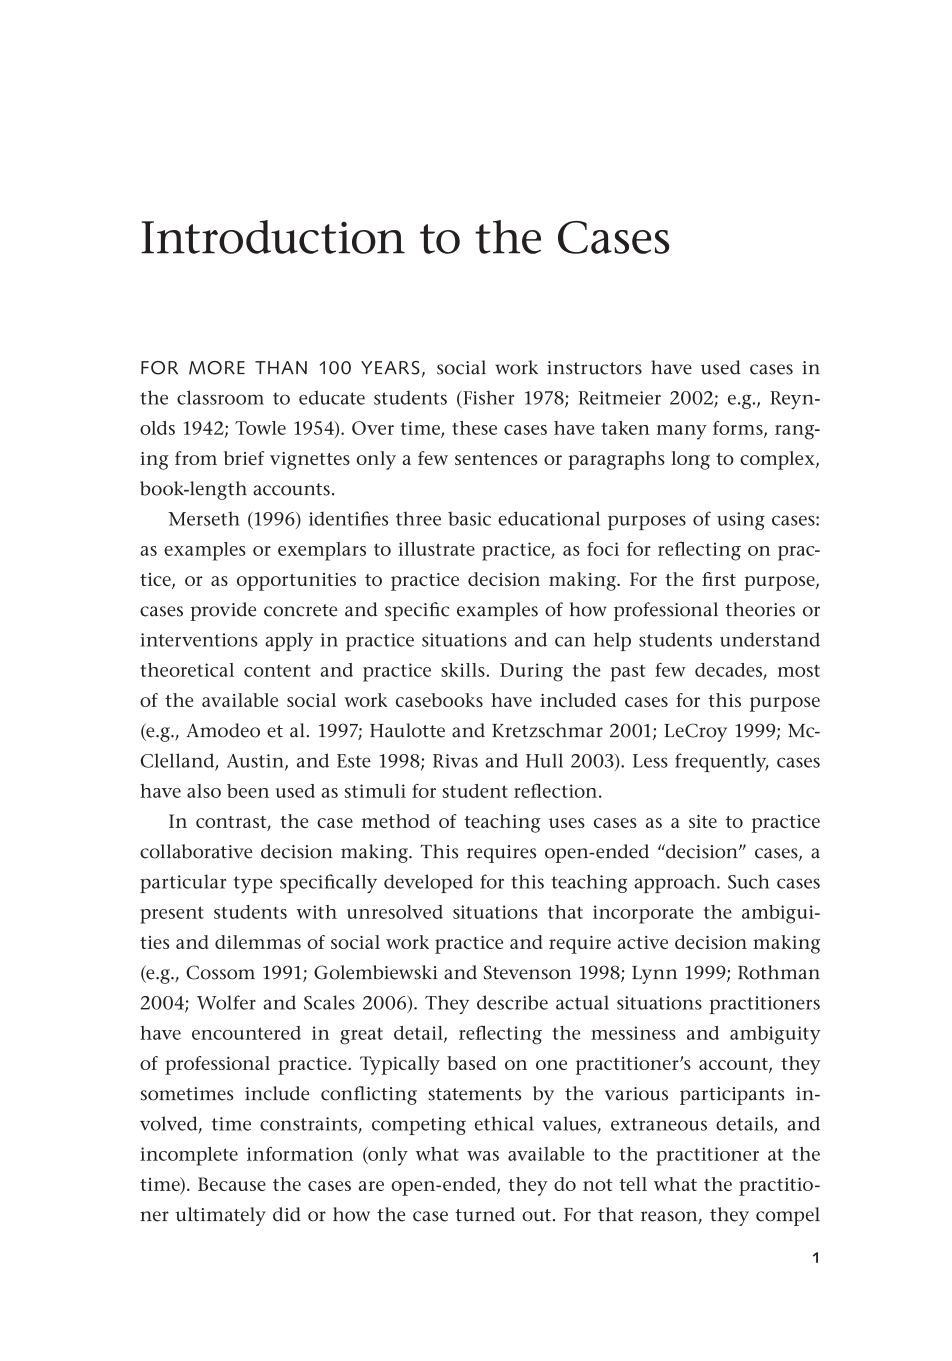 Dying, Death, and Bereavement in Social Work Practice: Decision Cases for Advanced Practice page 1